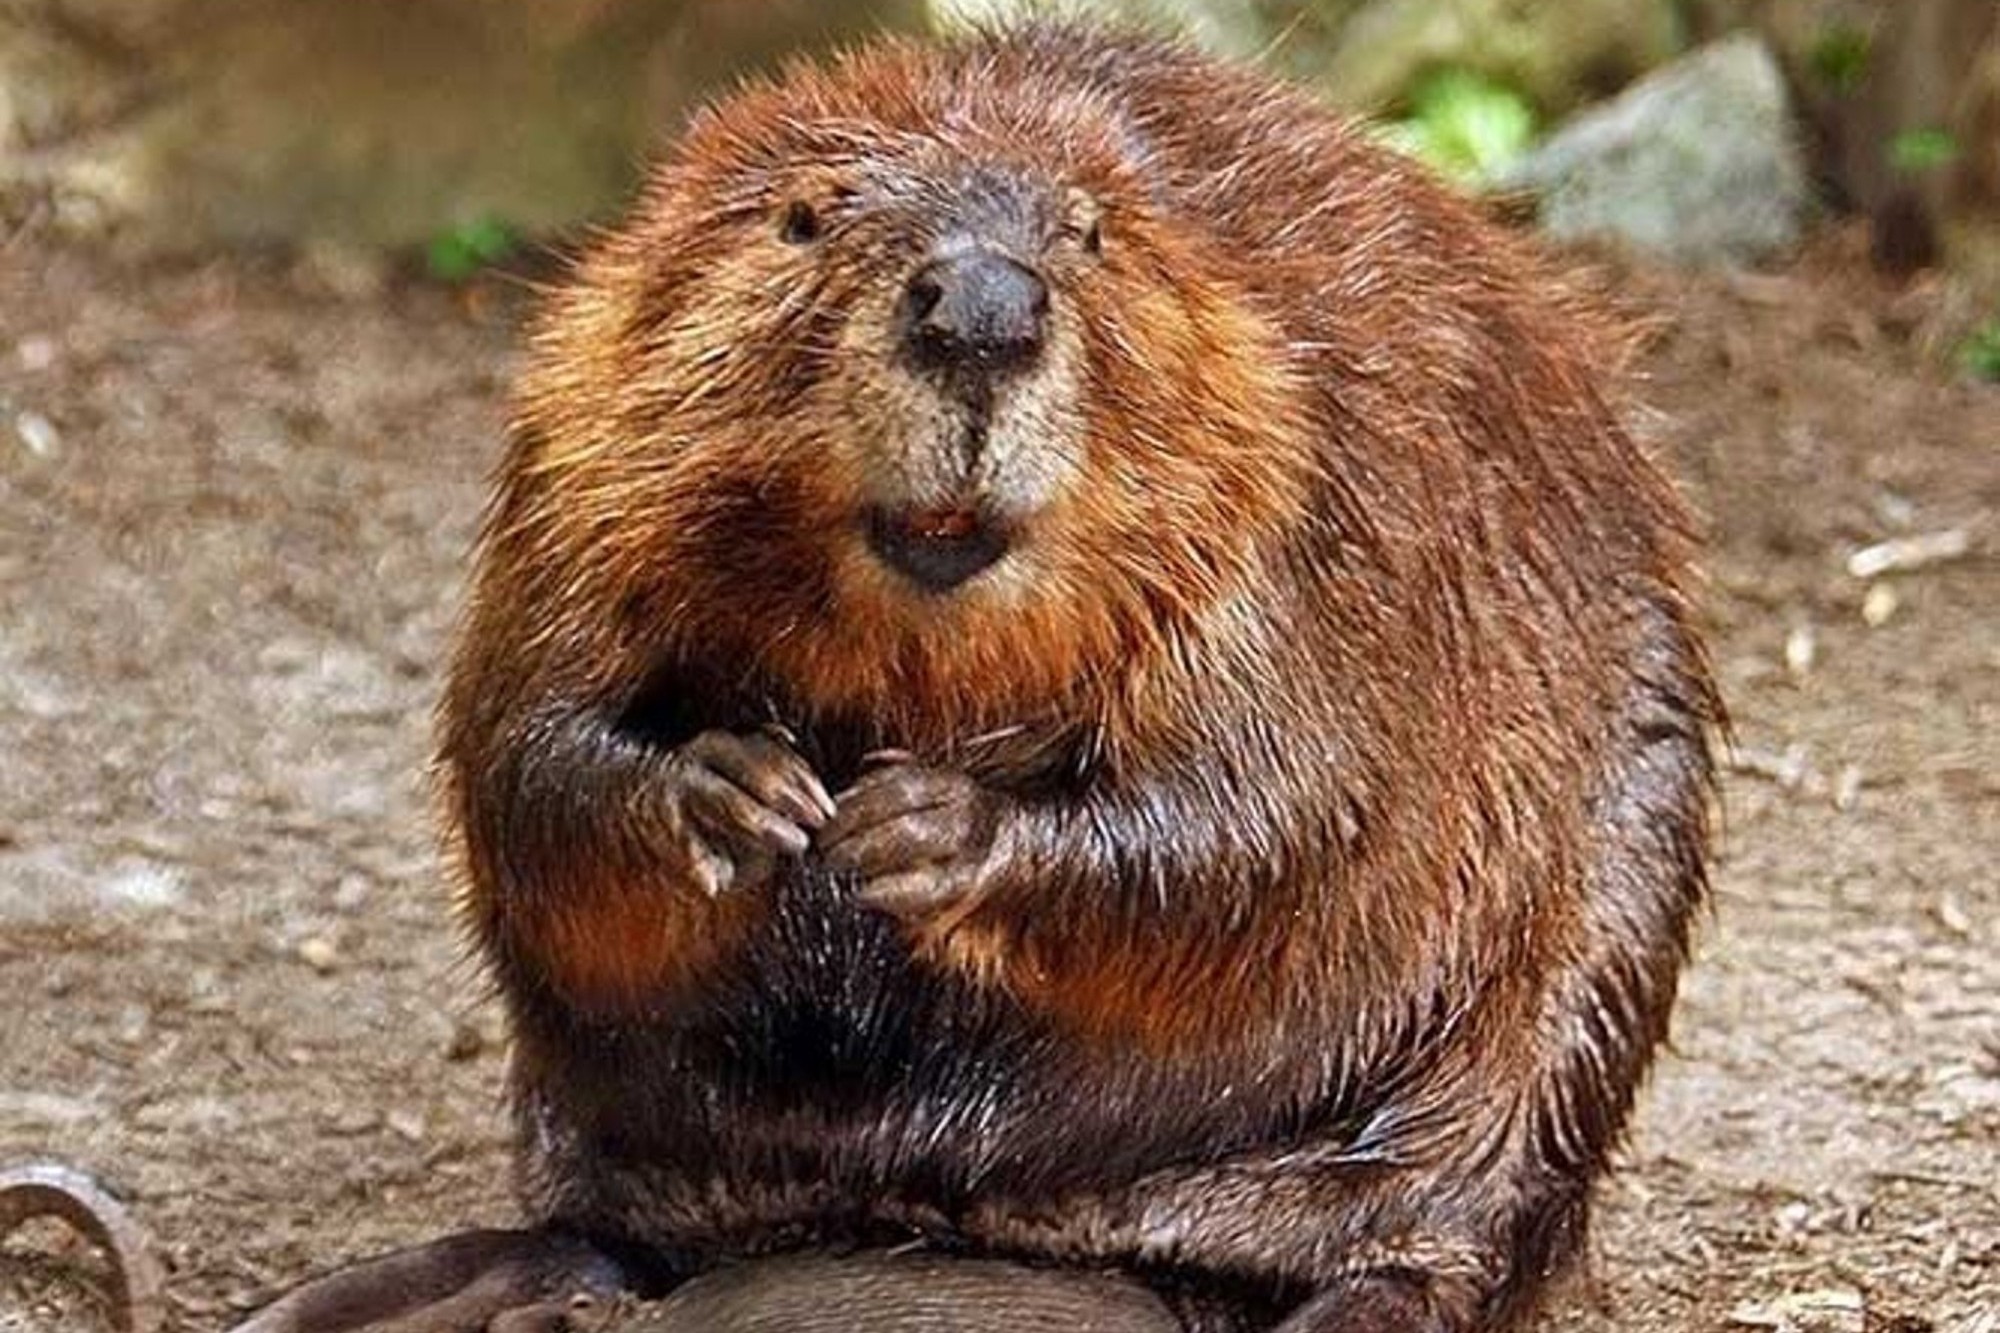 A town denied to beavers from the Internet

